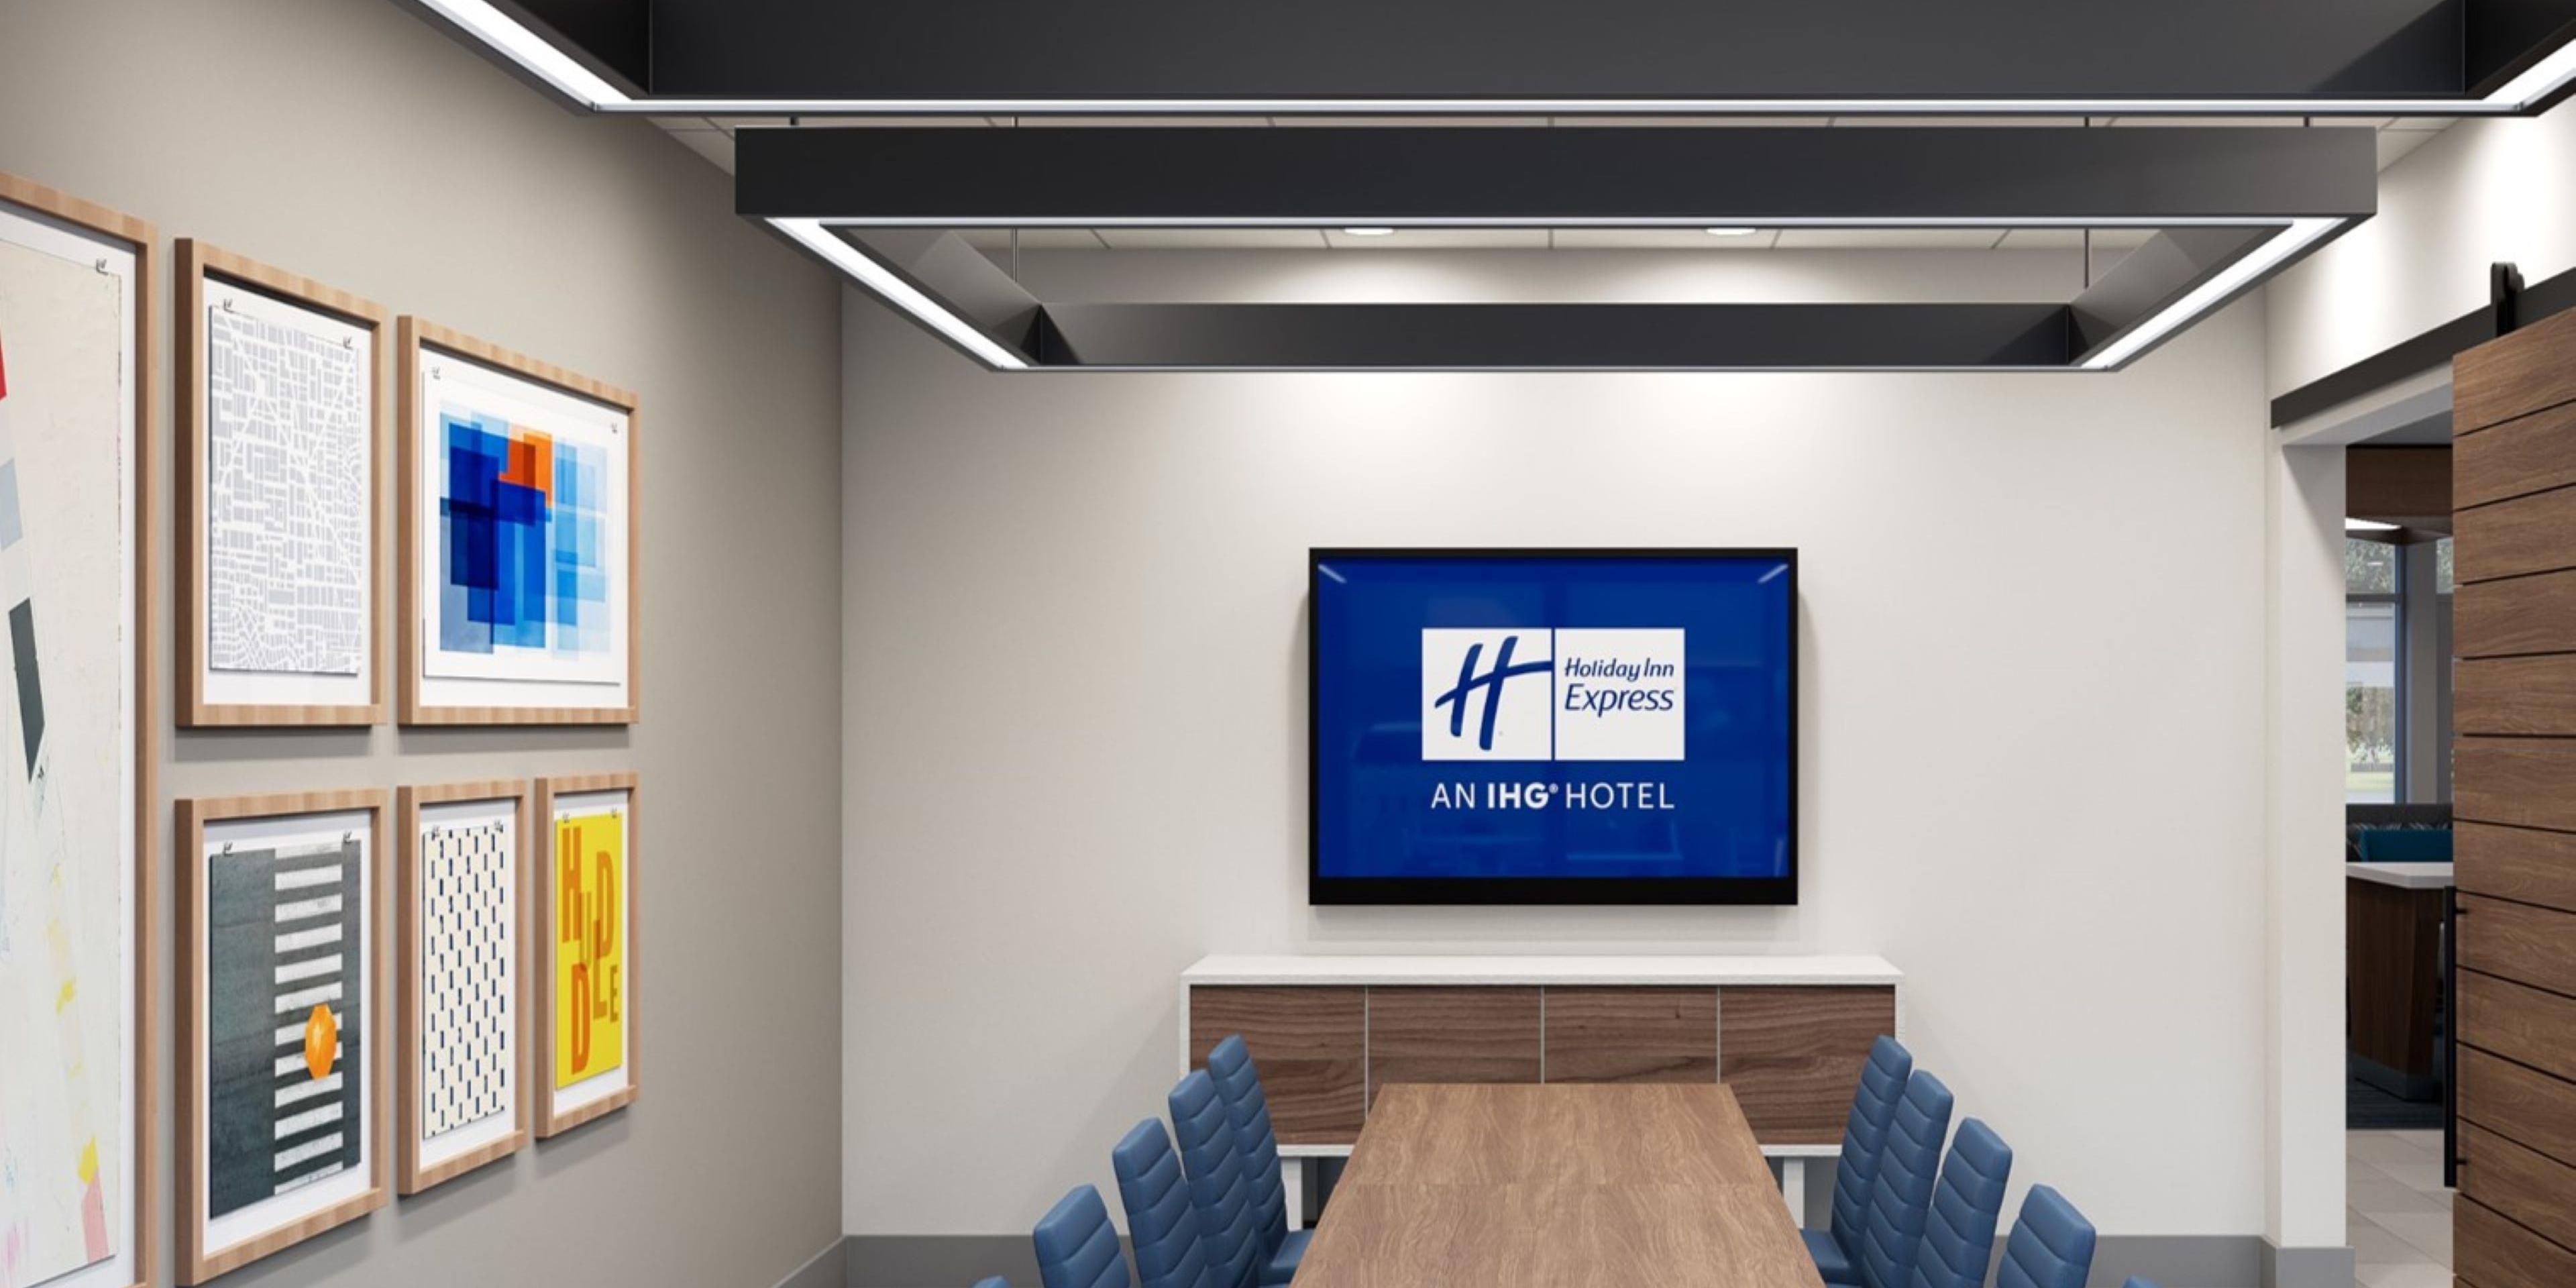 Need space for your smaller meetings? The Holiday Inn Express & Suites Harrisonburg - University Area provides a meeting space that can hold up to 16 people.